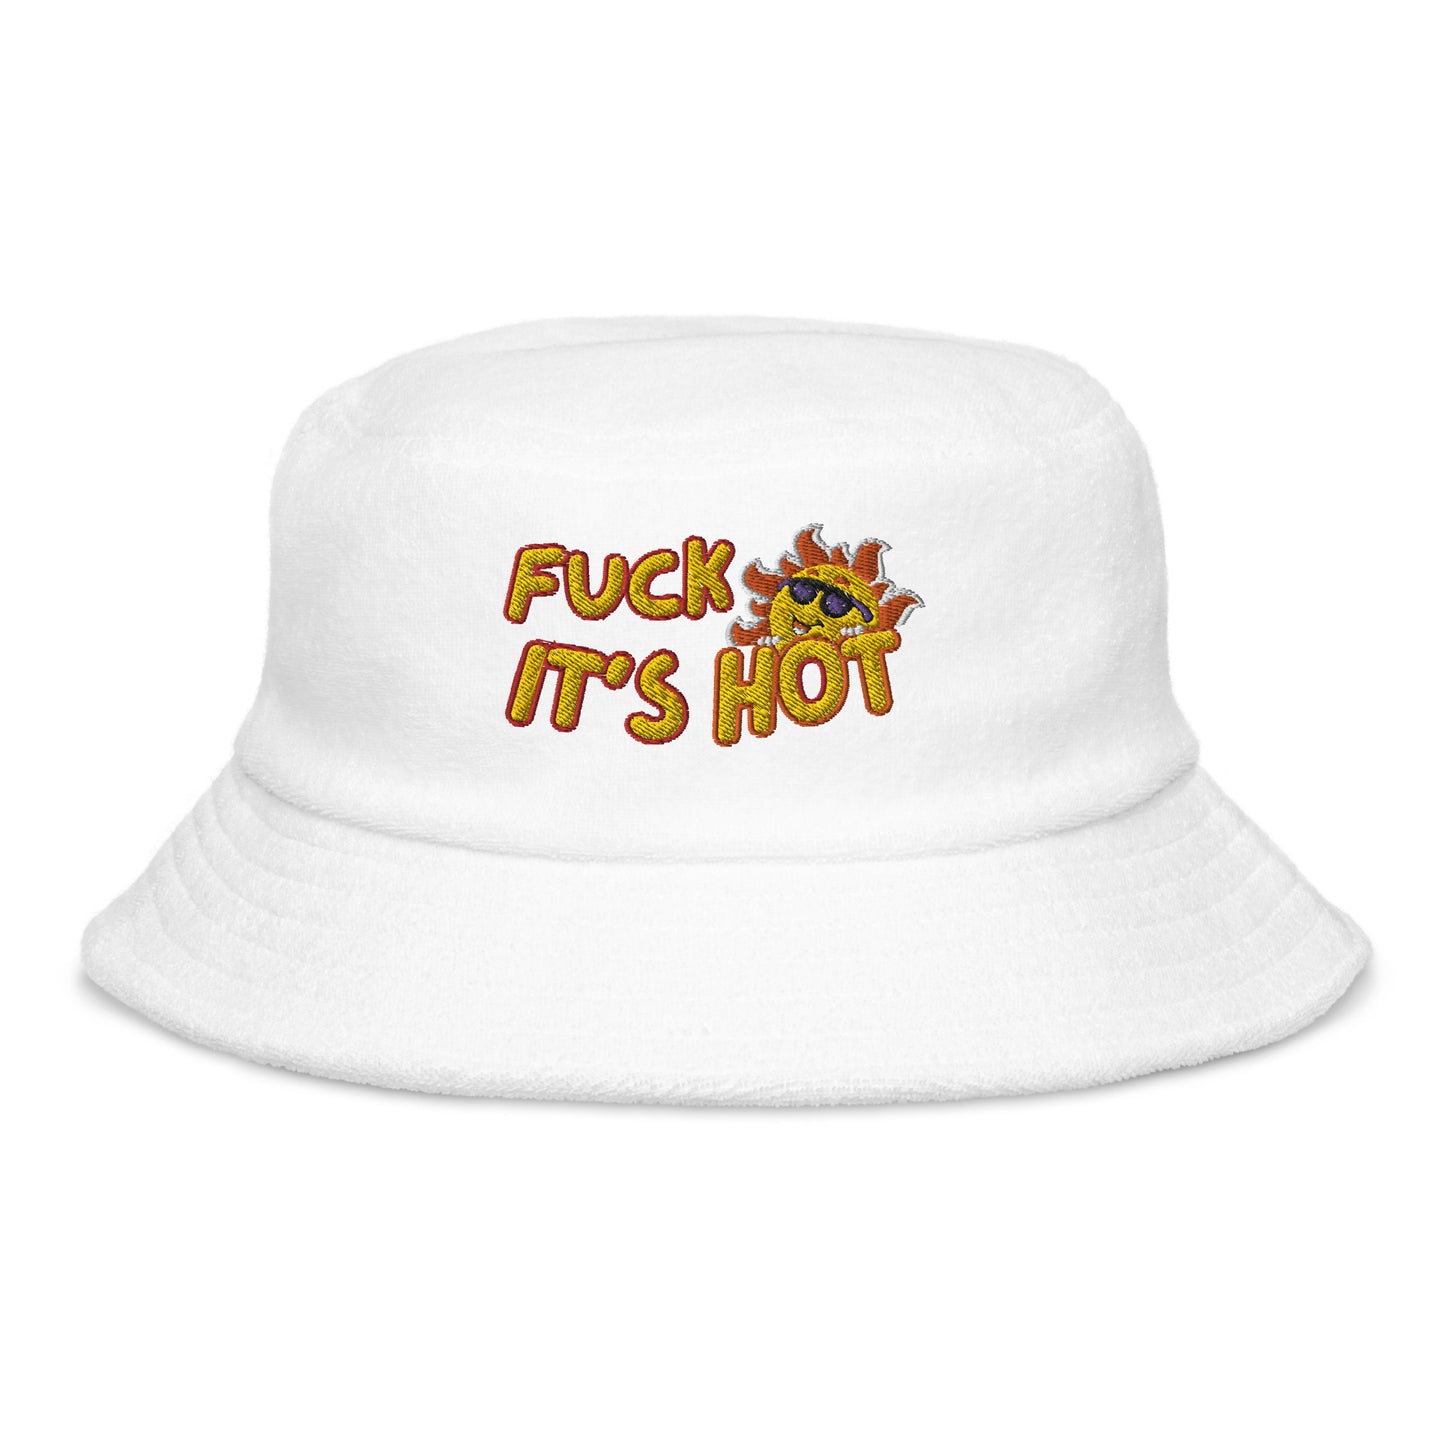 Fuck It's Hot - Unstructured Terry Cloth Bucket Hat